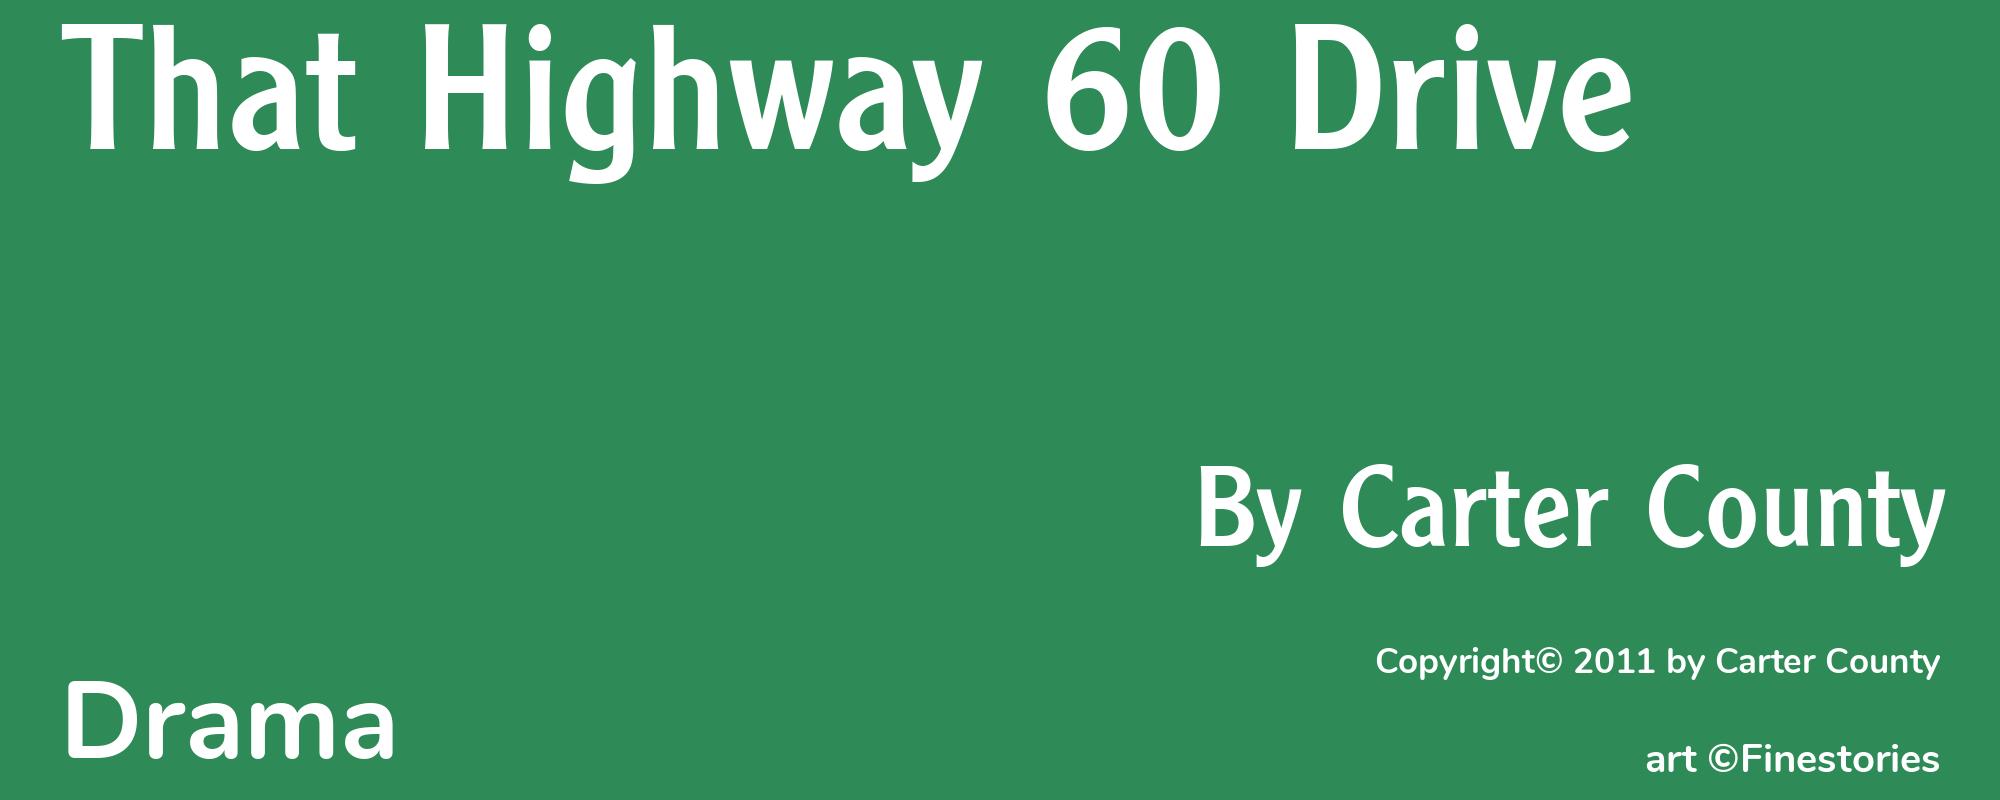 That Highway 60 Drive - Cover